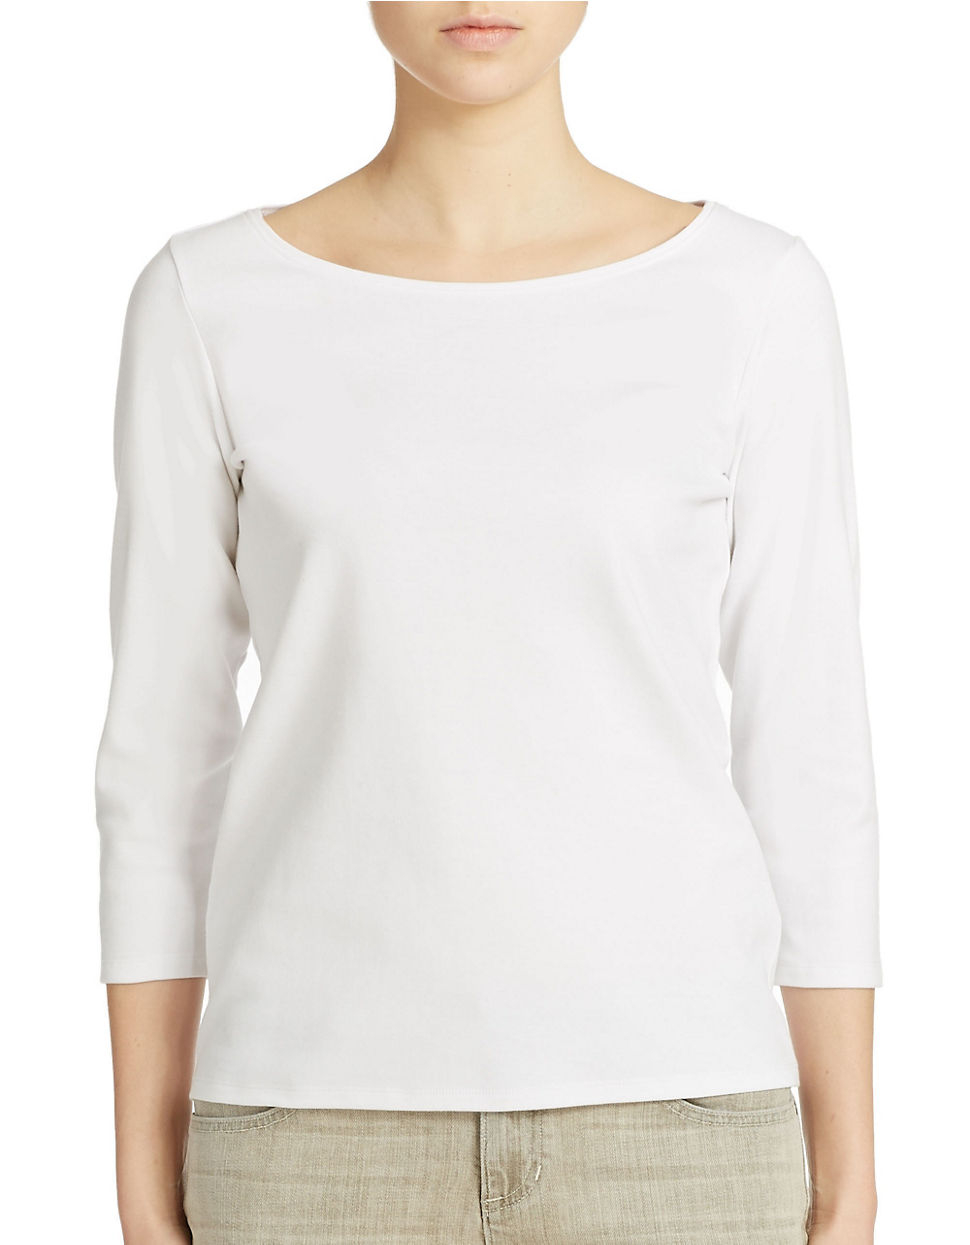 Eileen Fisher Cotton Petite 3/4 Sleeve Ballet Top in White - Lyst